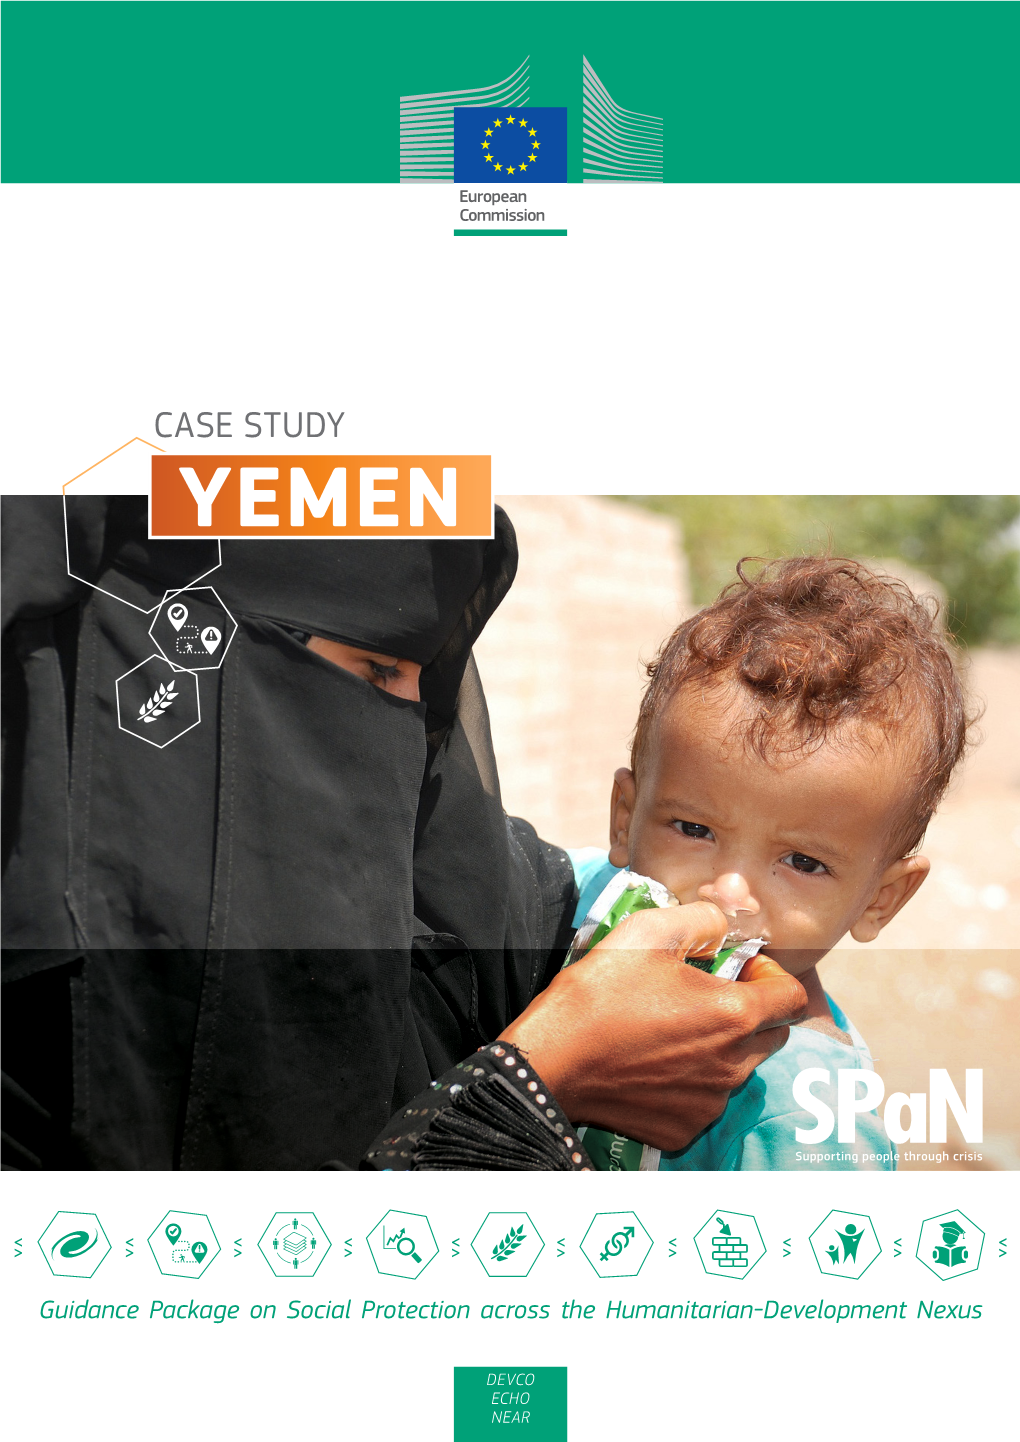 Yemen Case Study Was Produced As Part of the “Guidance Package on Social Protection Across the Humanitarian-Development Nexus” (Span)